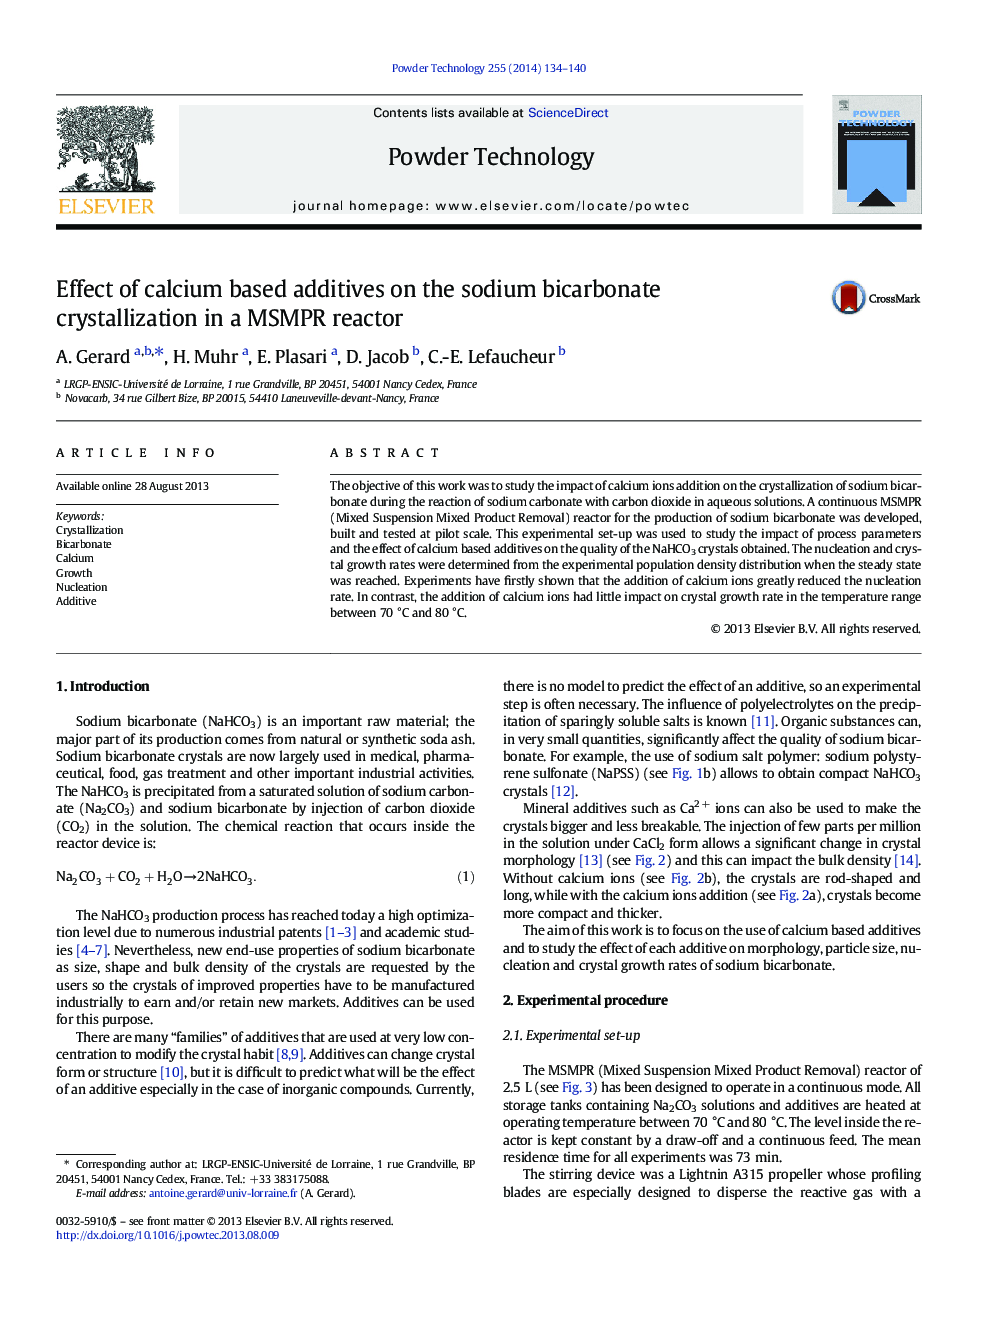 Effect of calcium based additives on the sodium bicarbonate crystallization in a MSMPR reactor